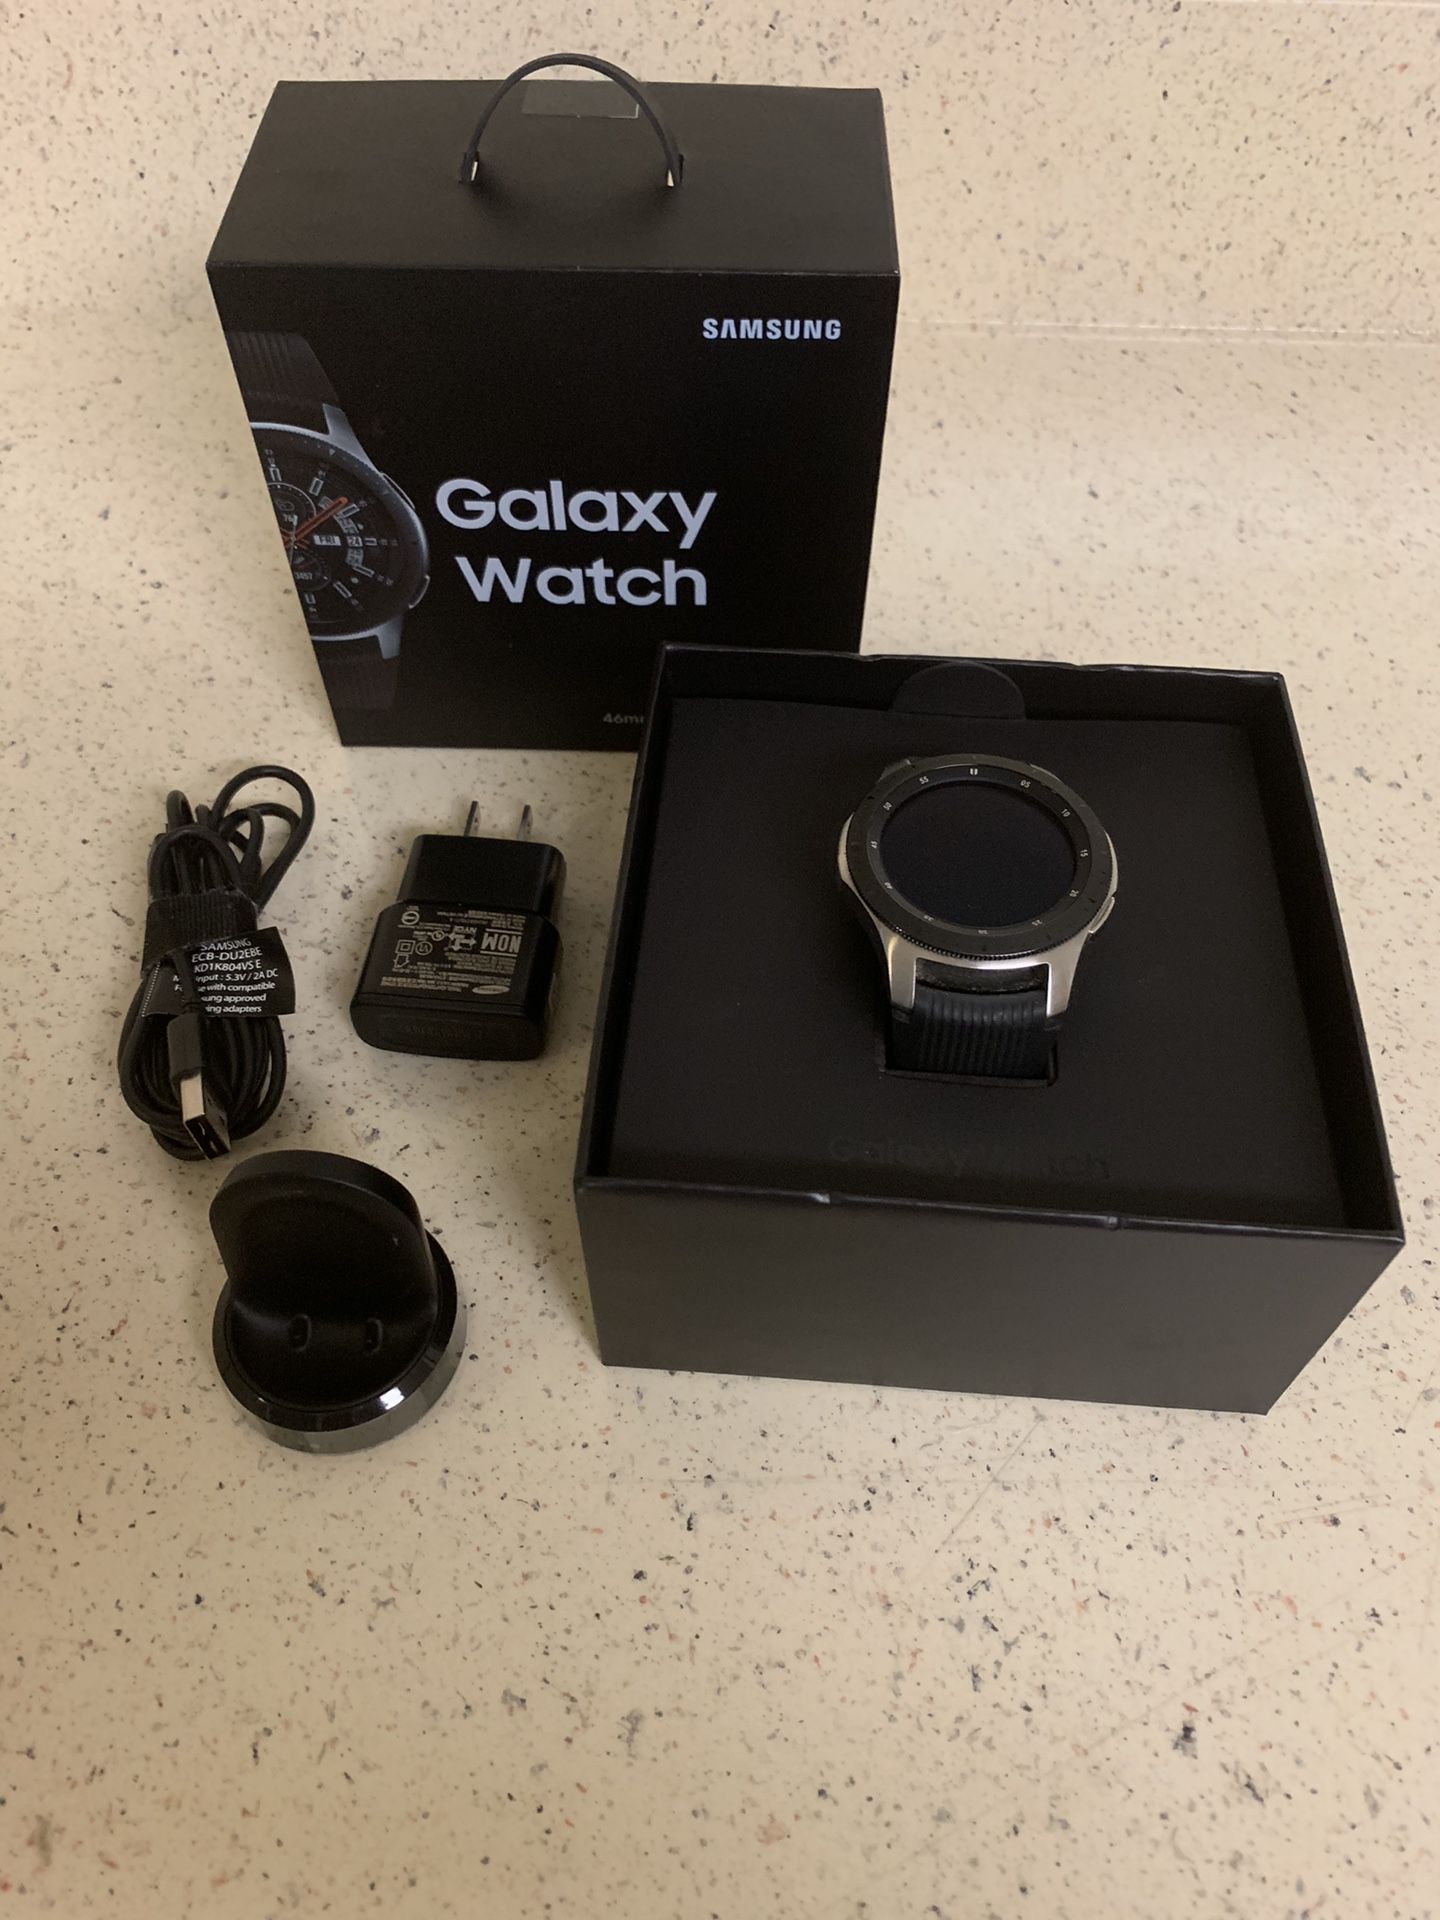 Galaxy Watch LTE / Wi-Fi Had it for 3 months and barley used.